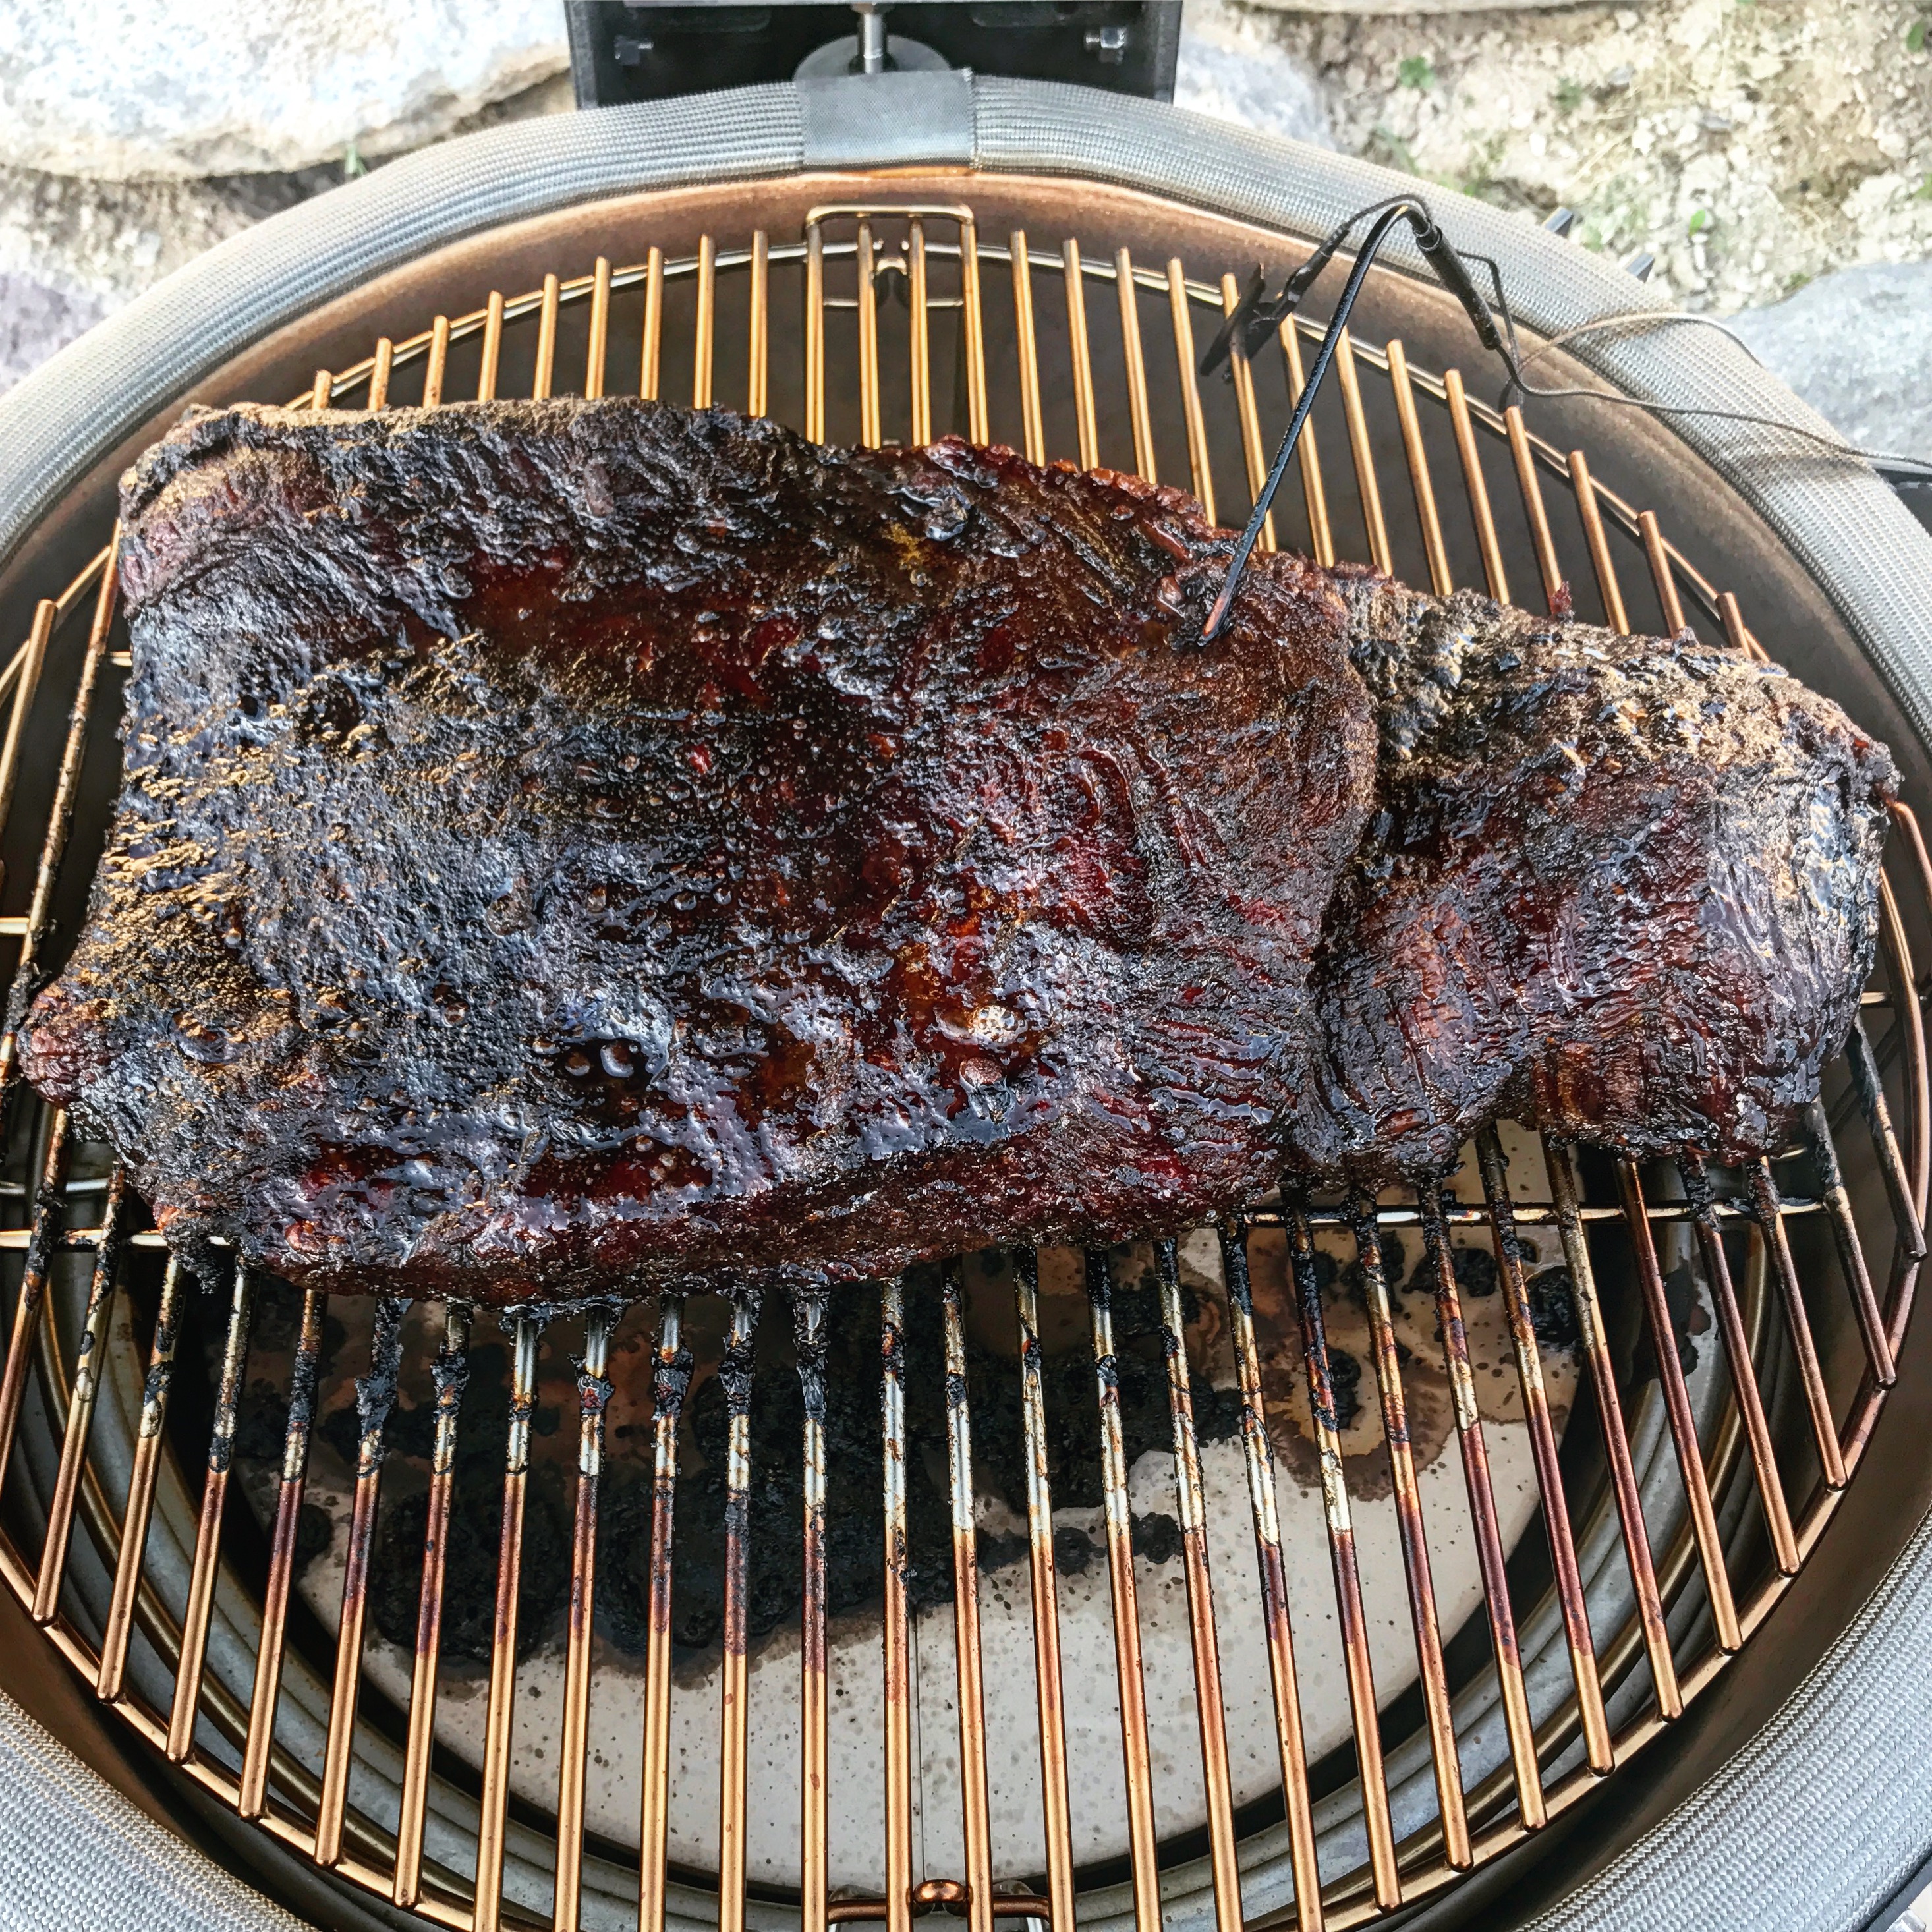 This is the brisket being discussed. The Flame Boss 300 let me sleep easily while this was smoking. 